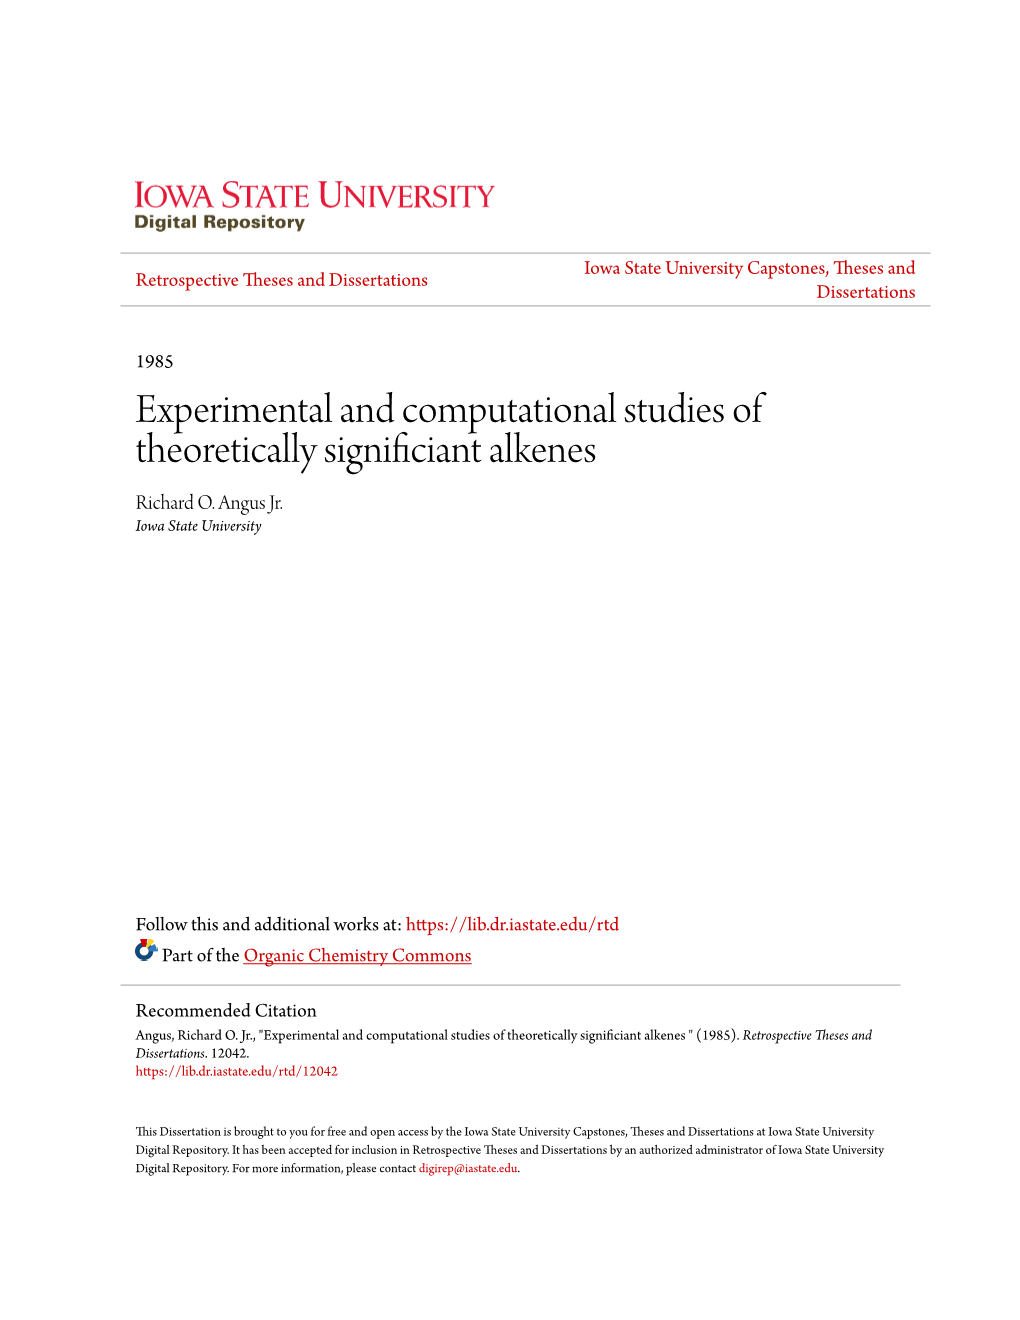 Experimental and Computational Studies of Theoretically Significiant Alkenes Richard O